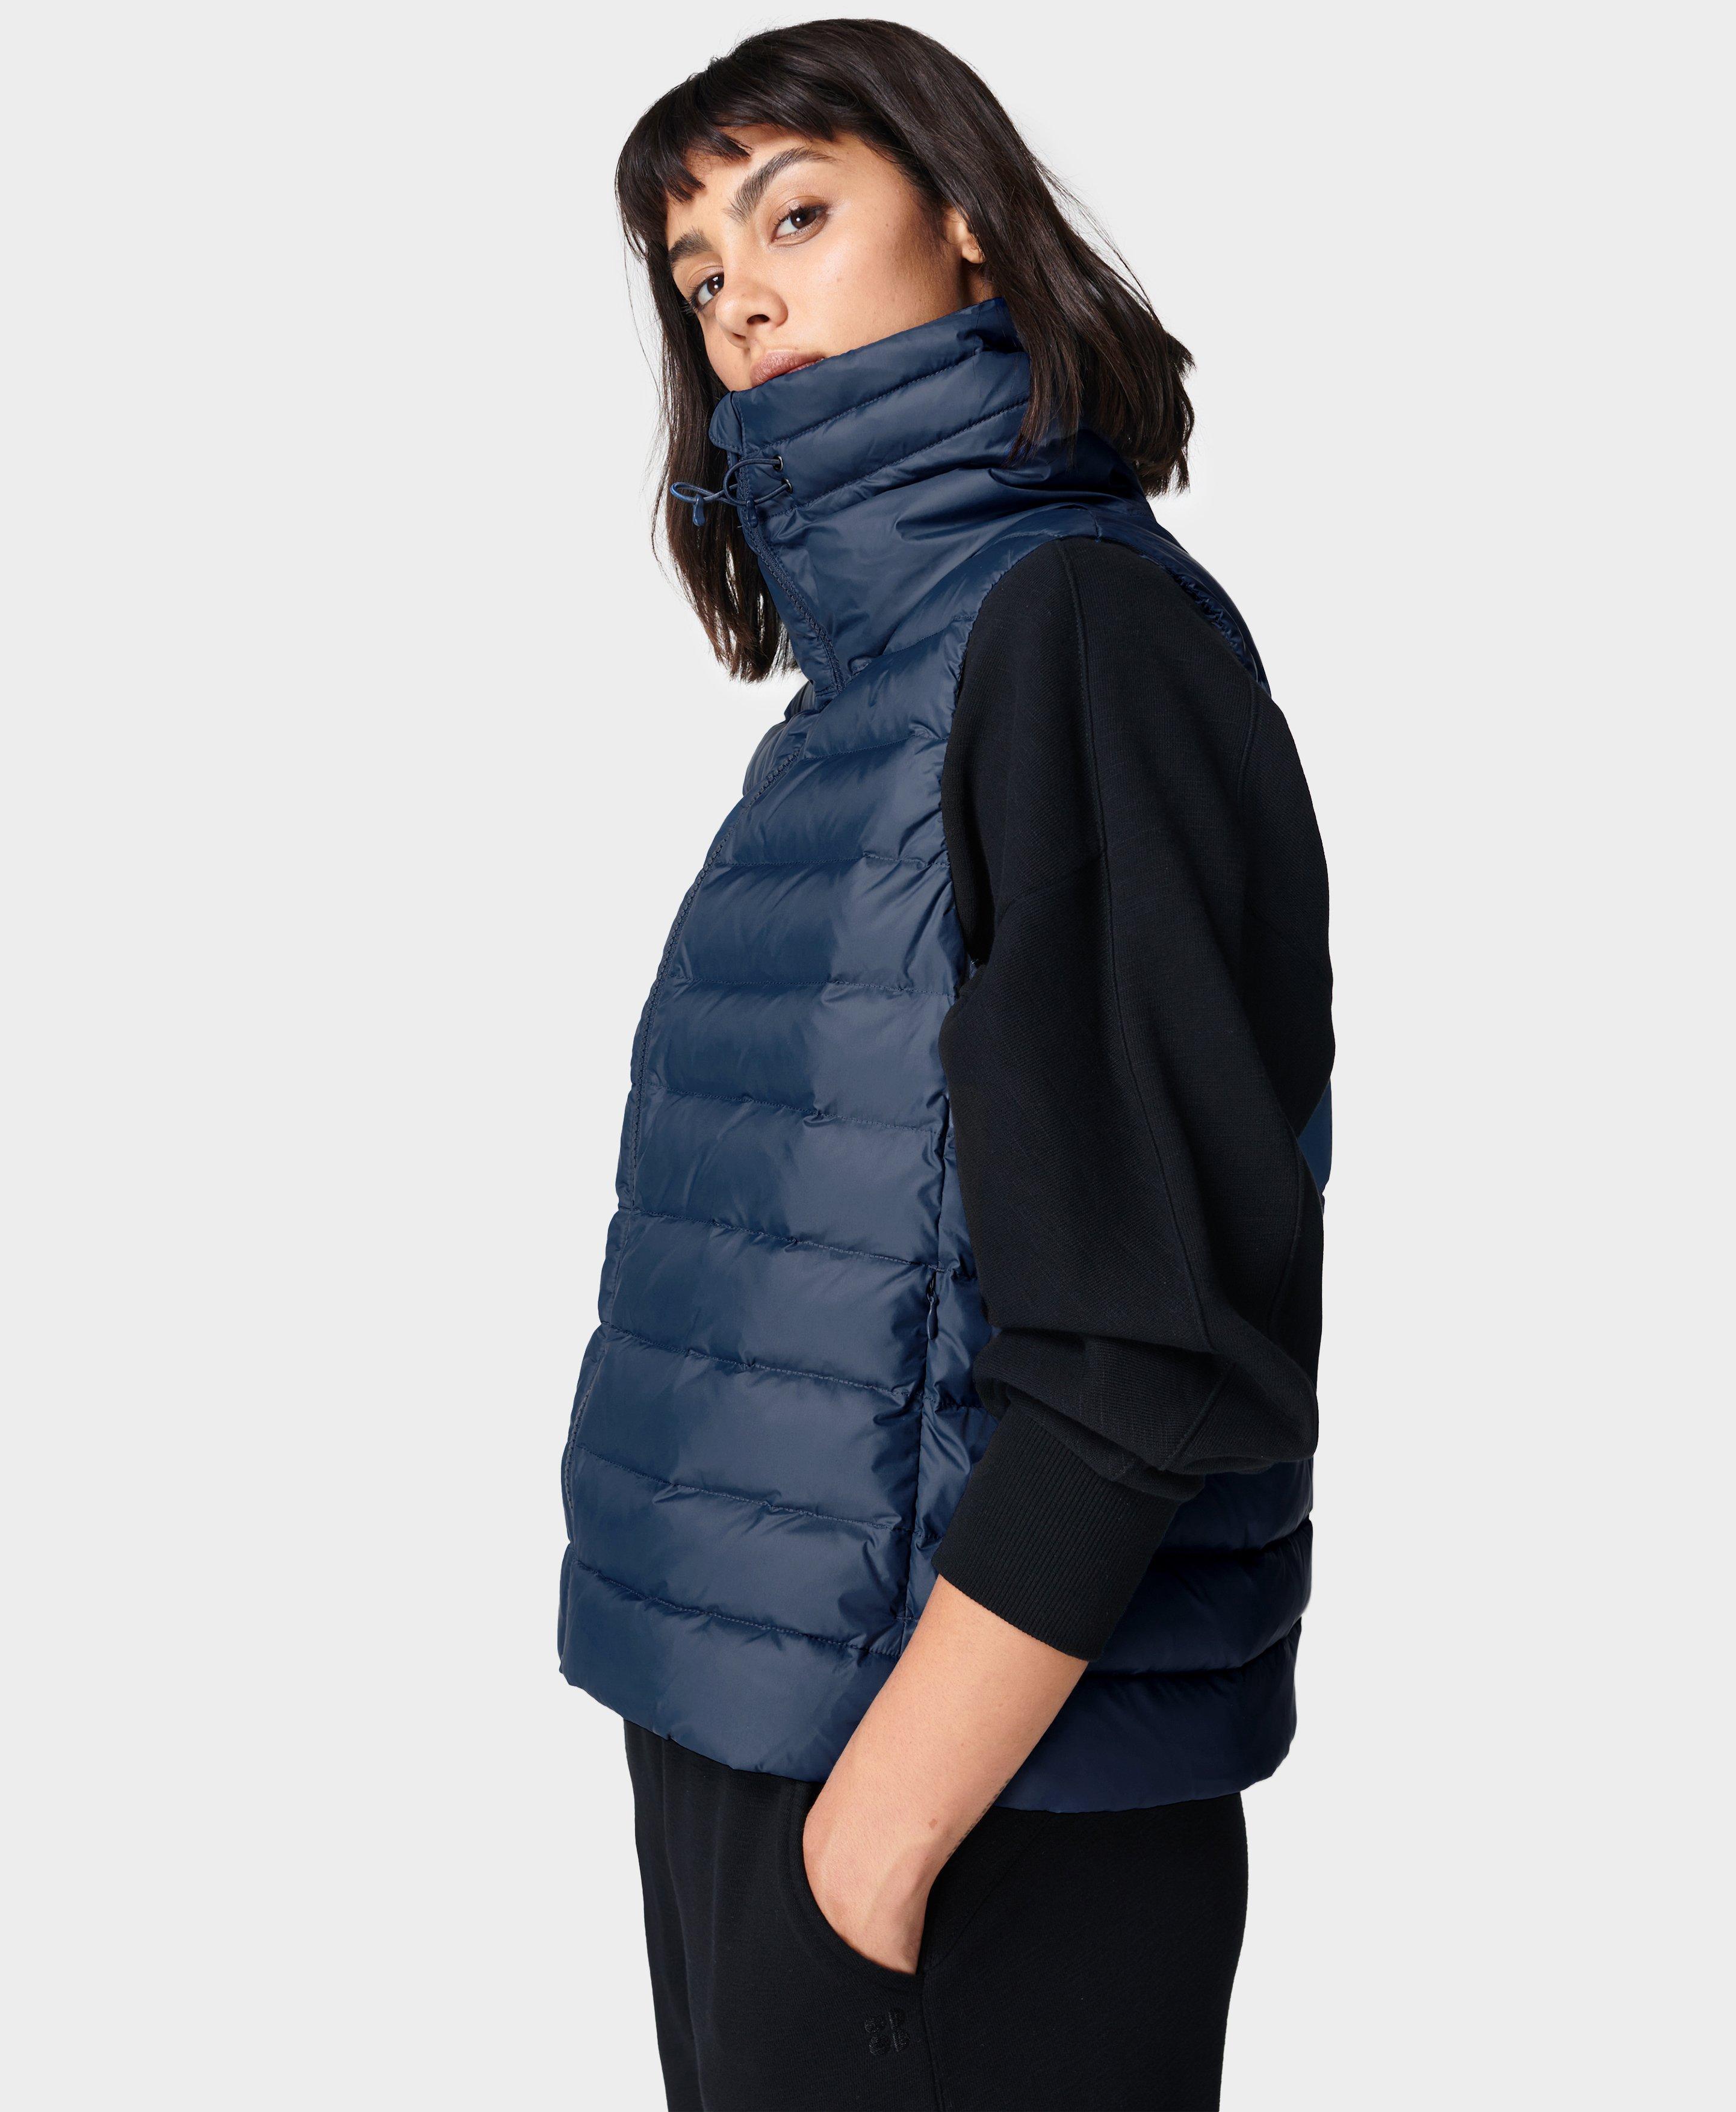 Sweaty Betty Synthetic Pathfinder Packable Vest in Nordic Blue 